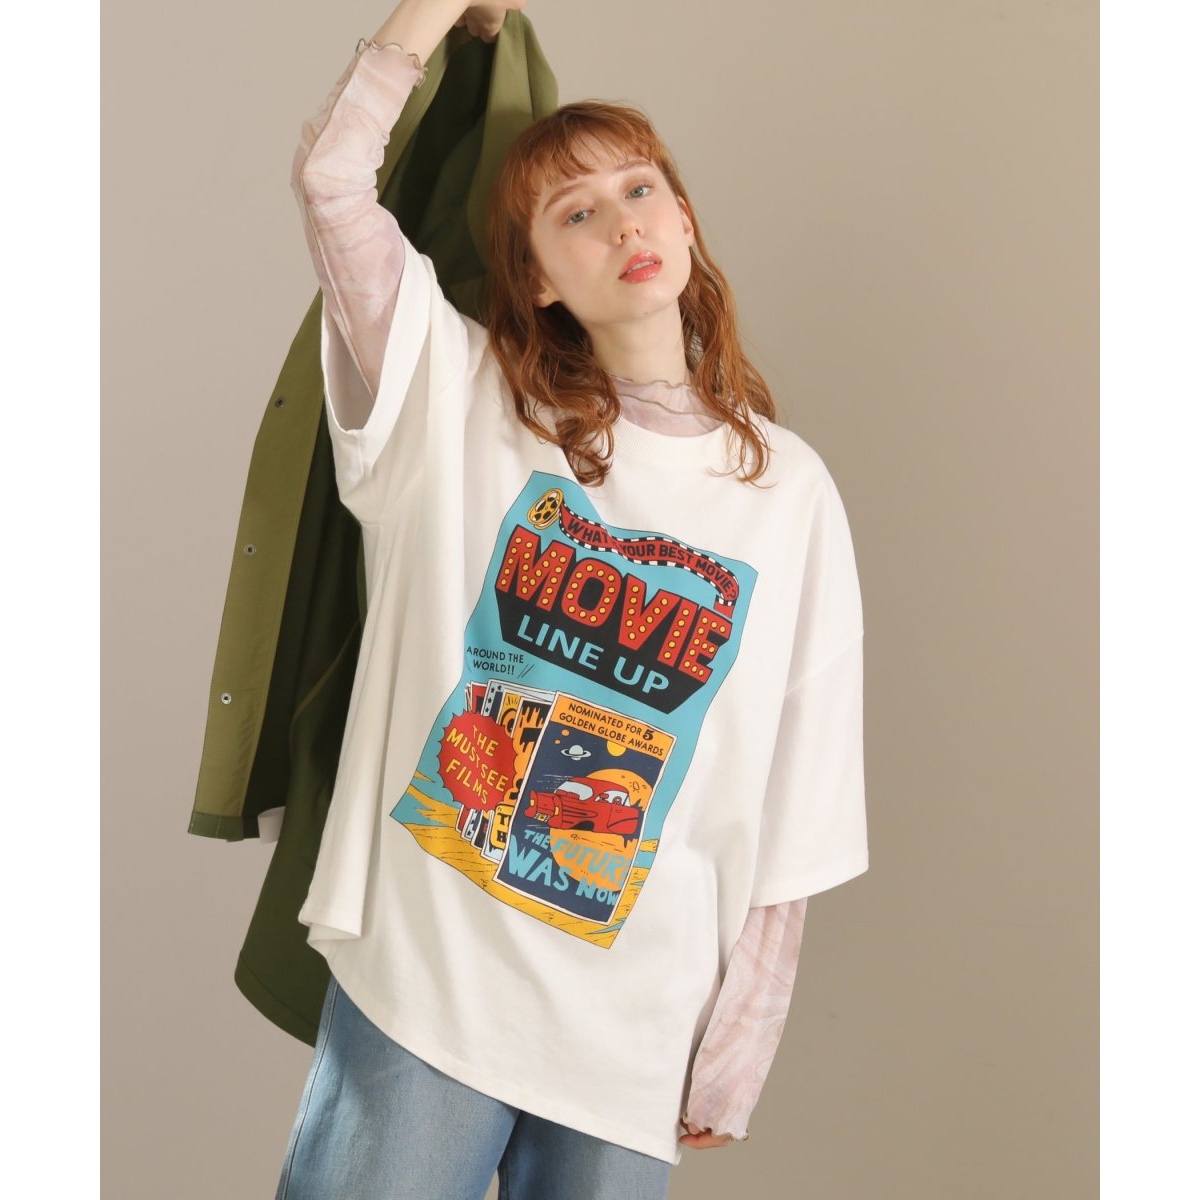 MOVIE LINEUPモチーフプリントTシャツ | ダブルネーム(DOUBLENAME